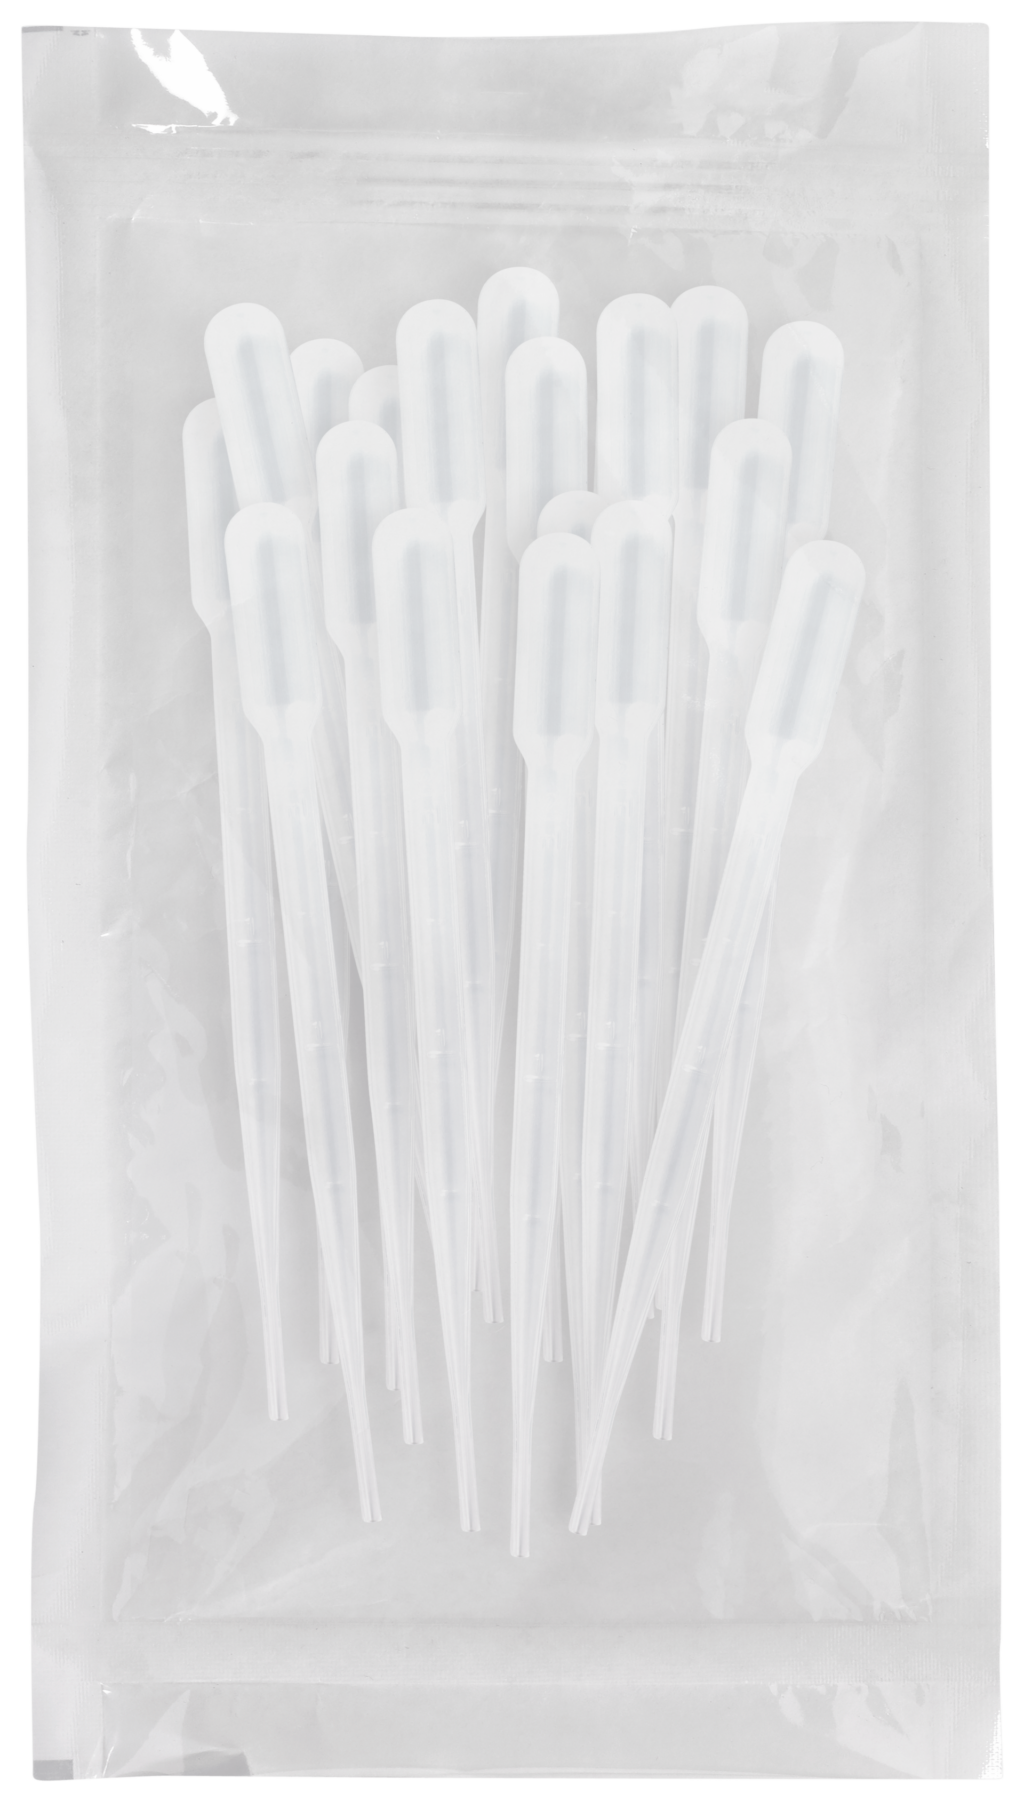 Disposable Transfer Pipet 212CS20 Transfer Pipet for Blood Bank Grad. Up to 2 mL at 0.5 mL Intervals - 20 per Peel Pouch, Sterile